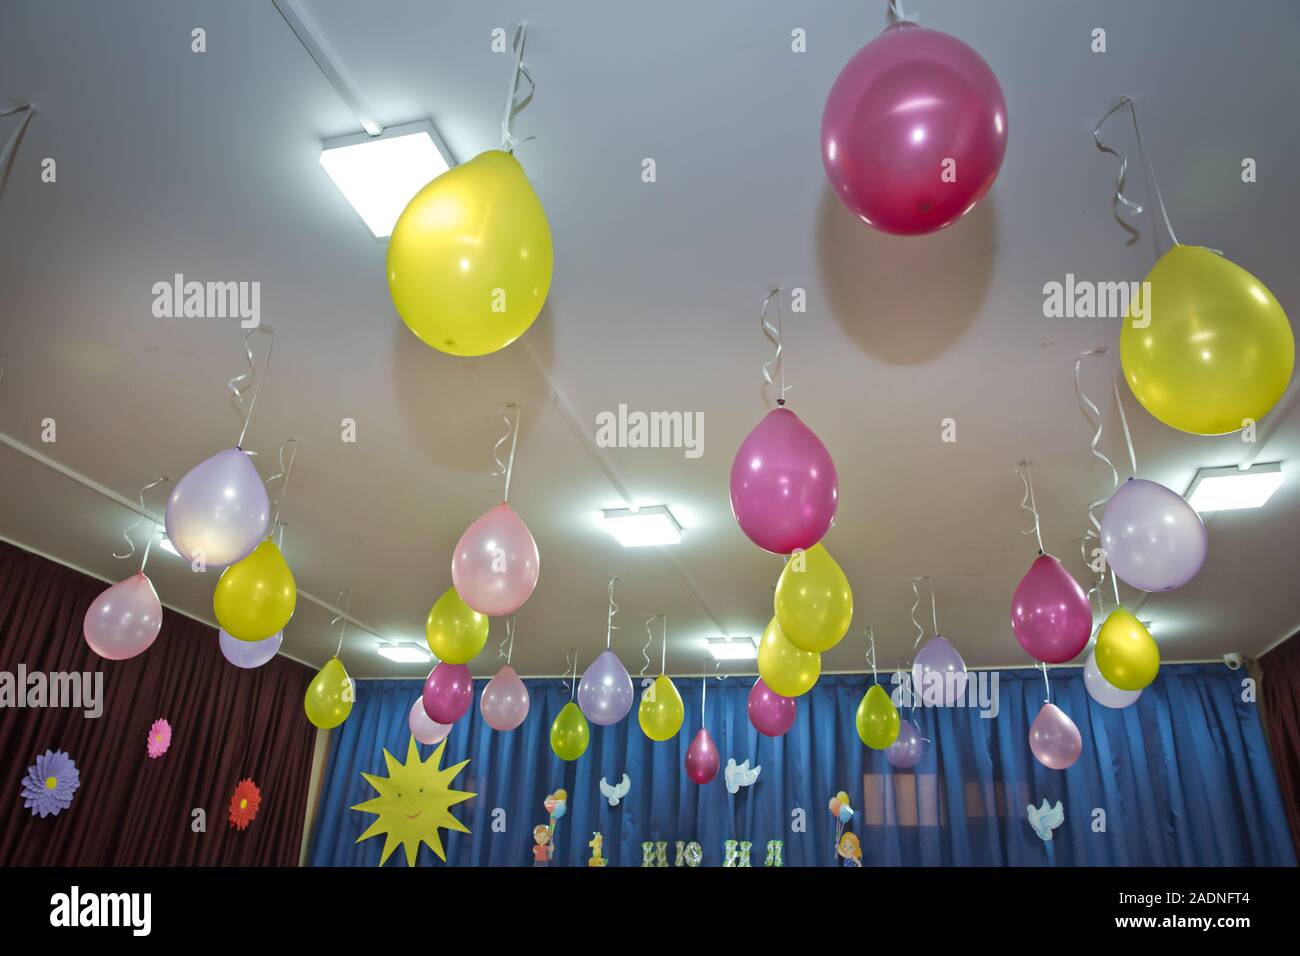 Pink And Yellow Balloons Float On The White Ceiling In The